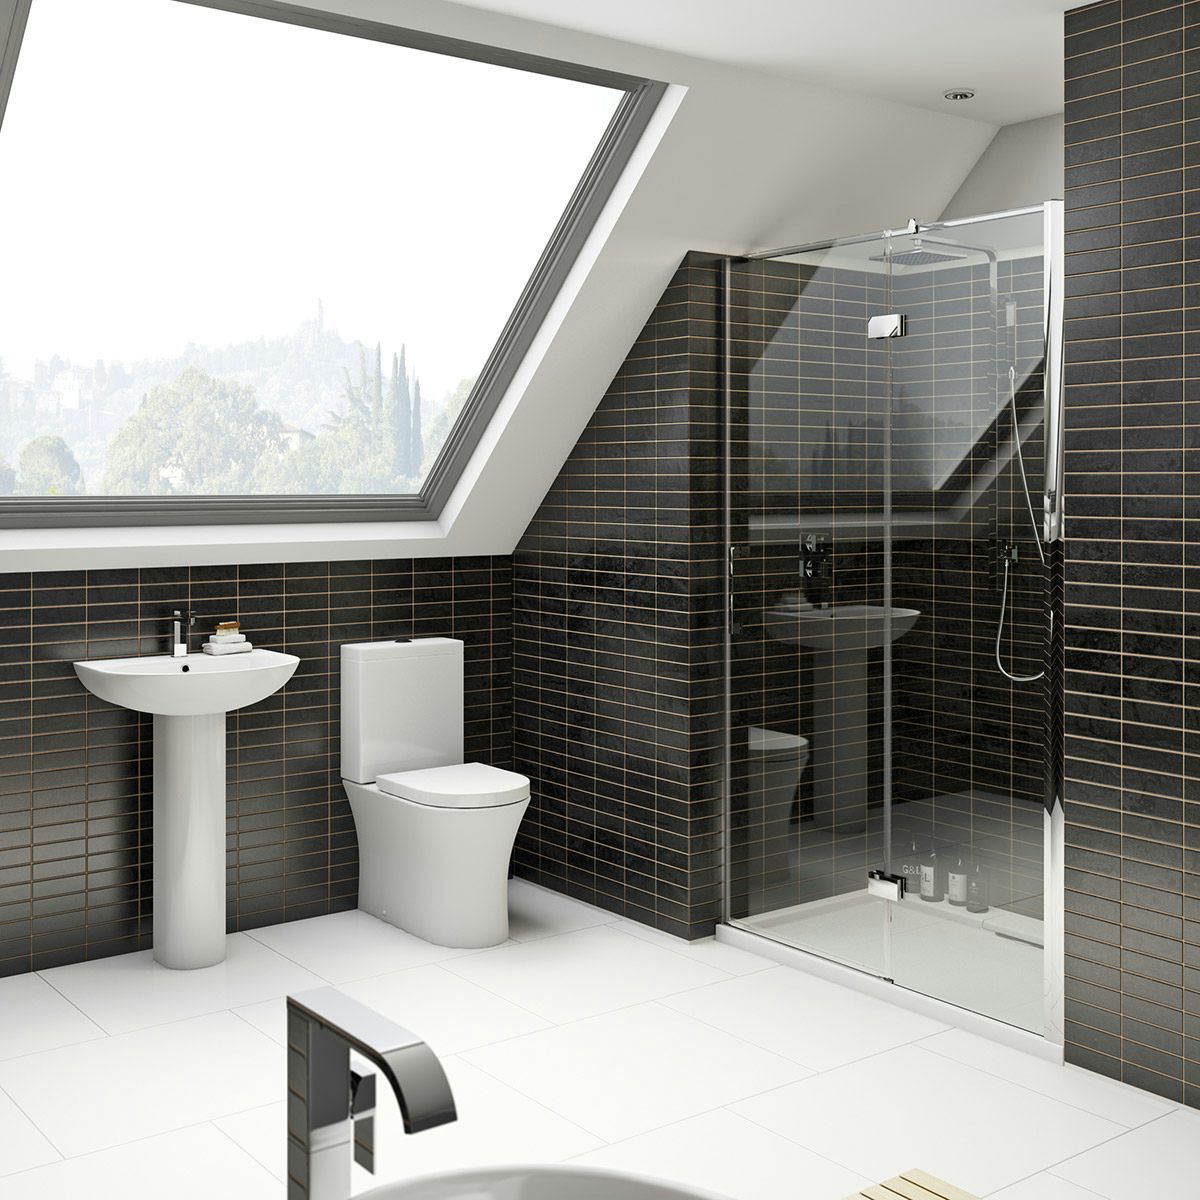 The Mode Hardy rimless ensuite suite with 8mm shower door